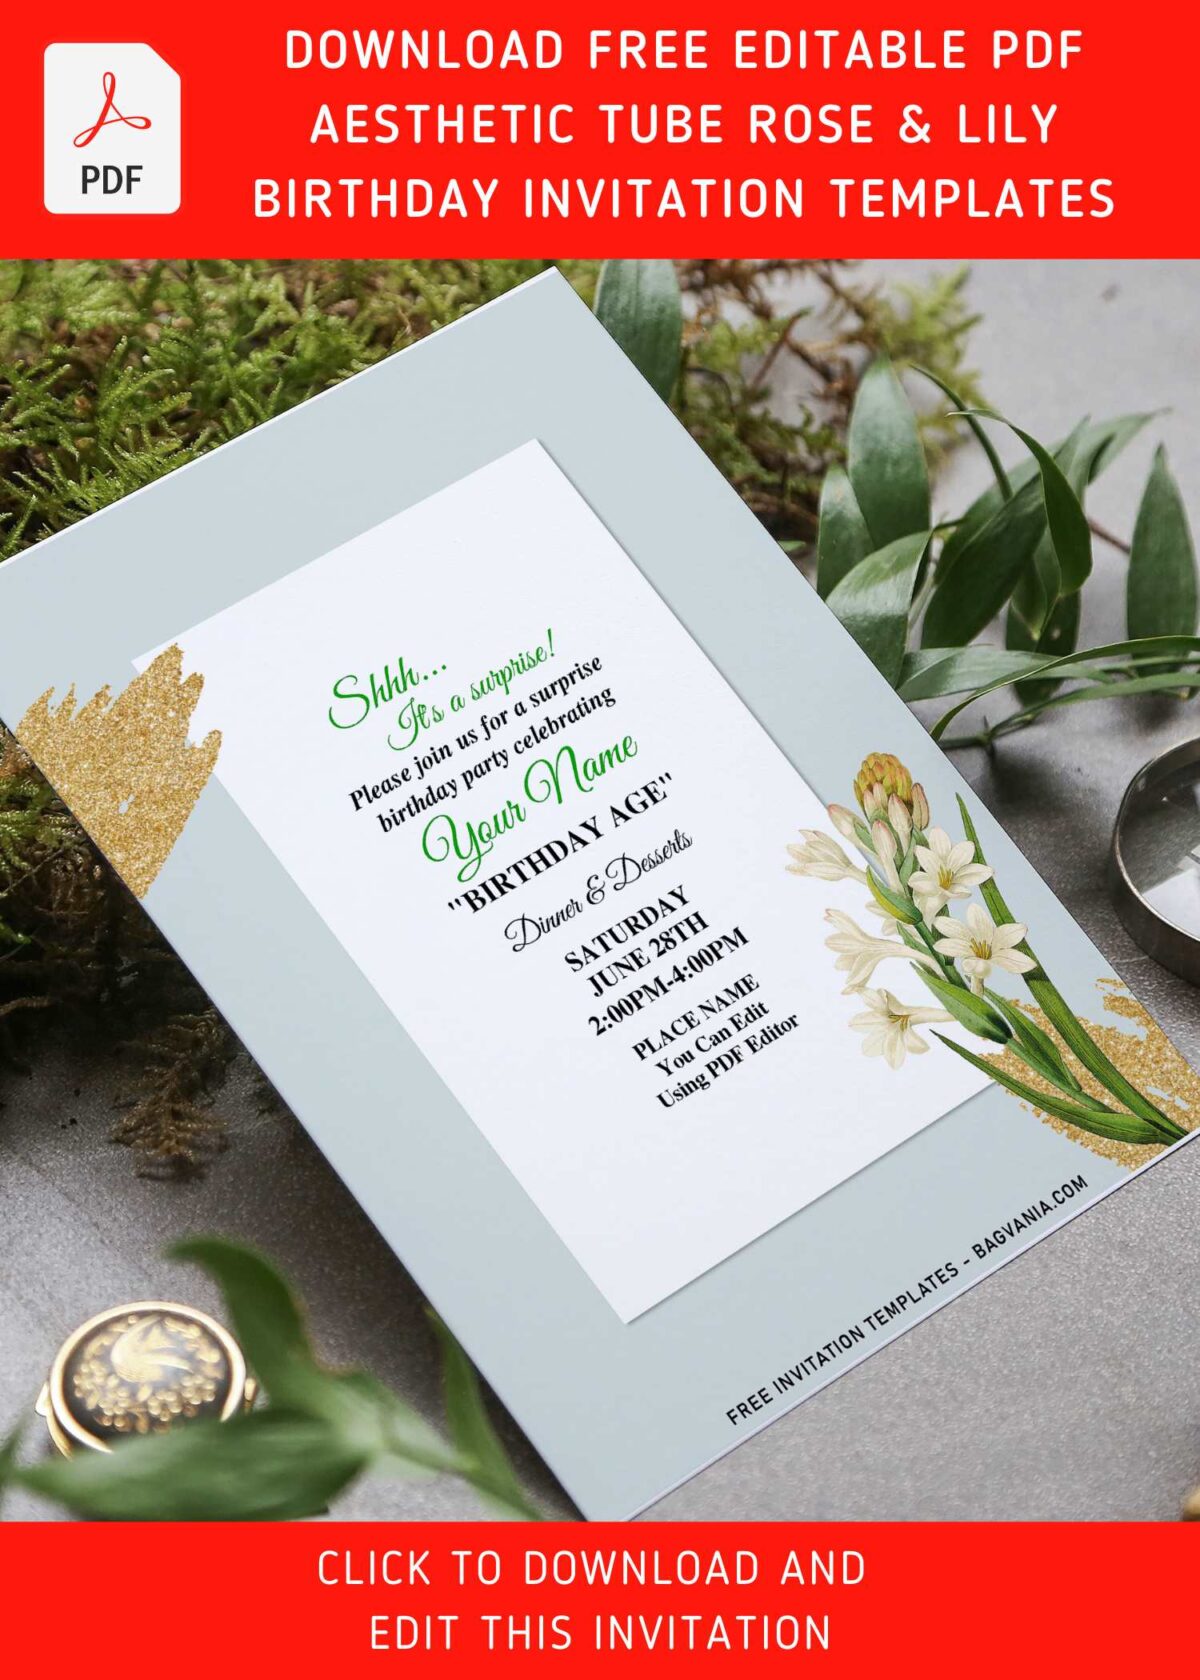 (Free Editable PDF) Glimmering Gold Glitters And Tuberose Floral Invitation Templates with watercolor tuberose floral decoration